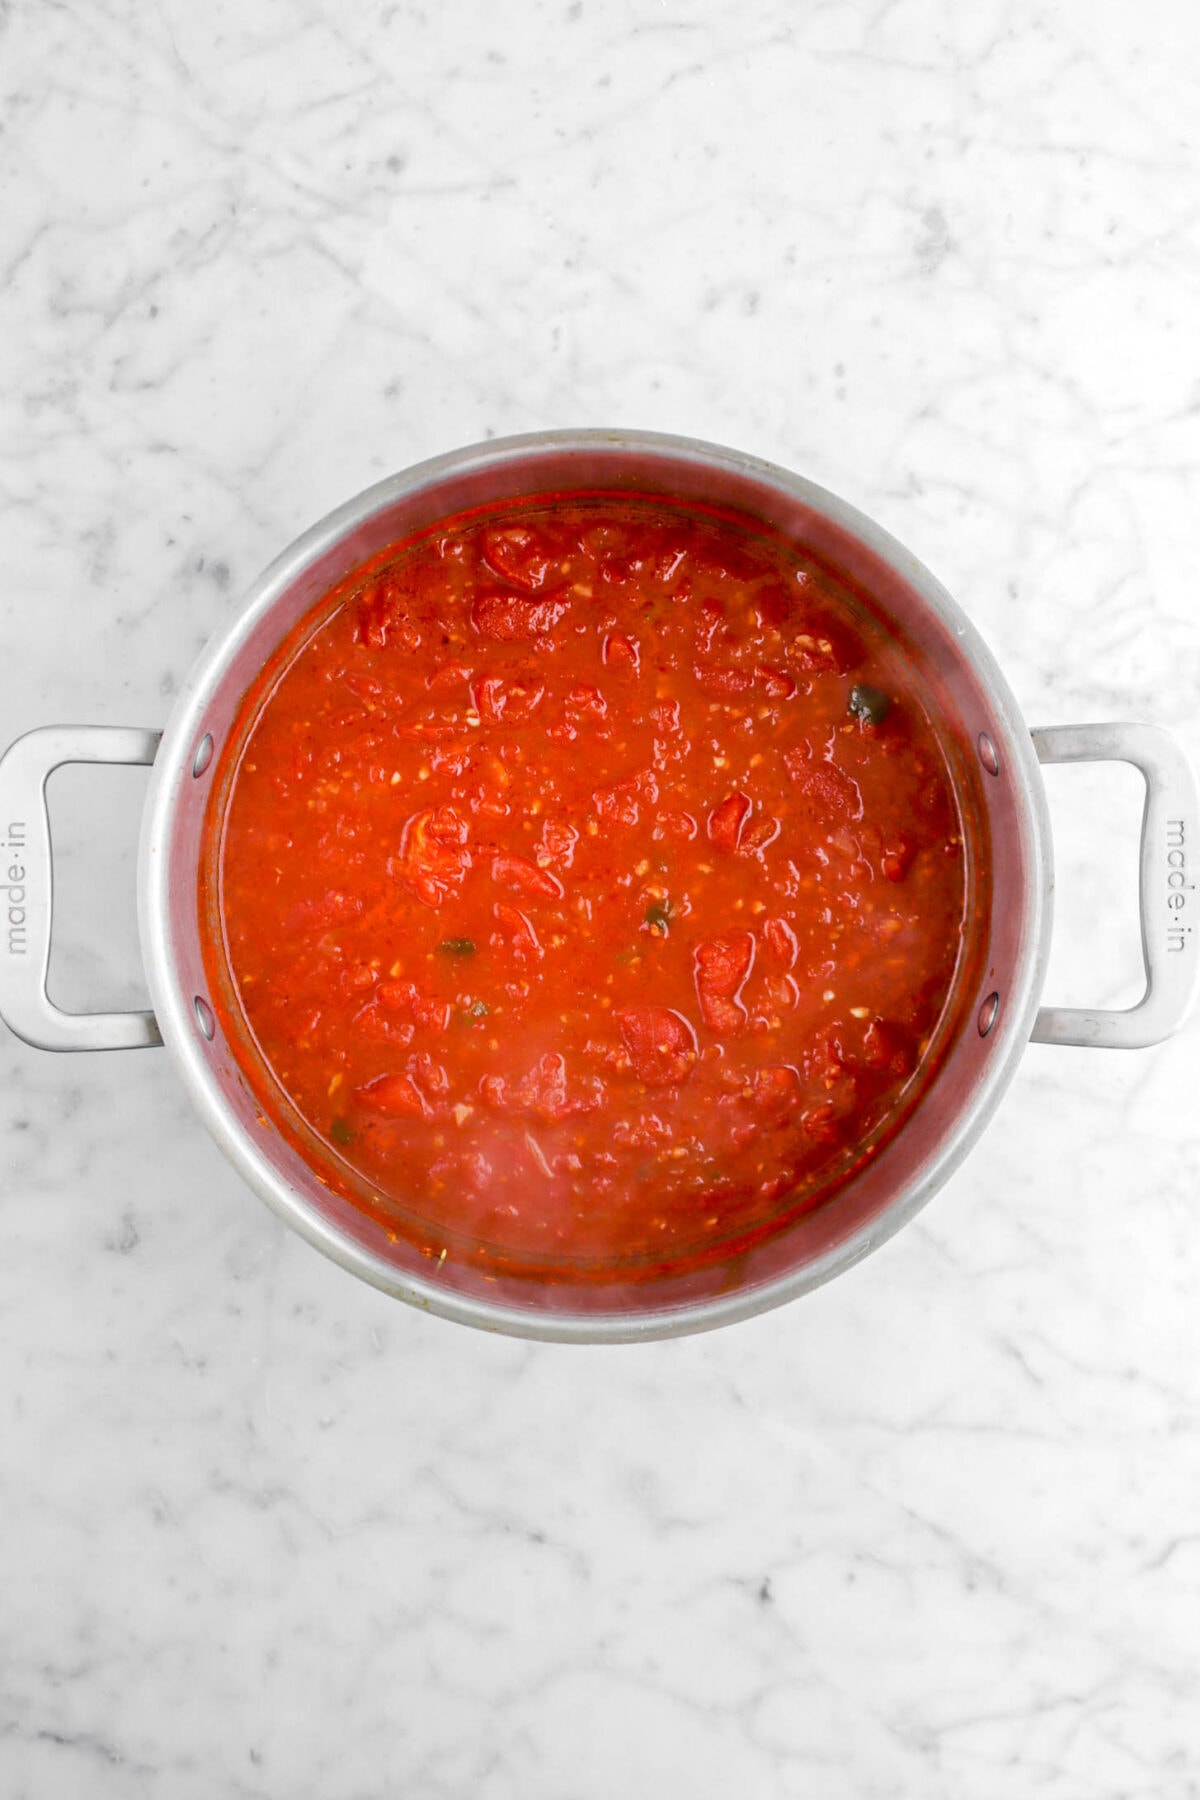 cooked down tomato mixture in large pot